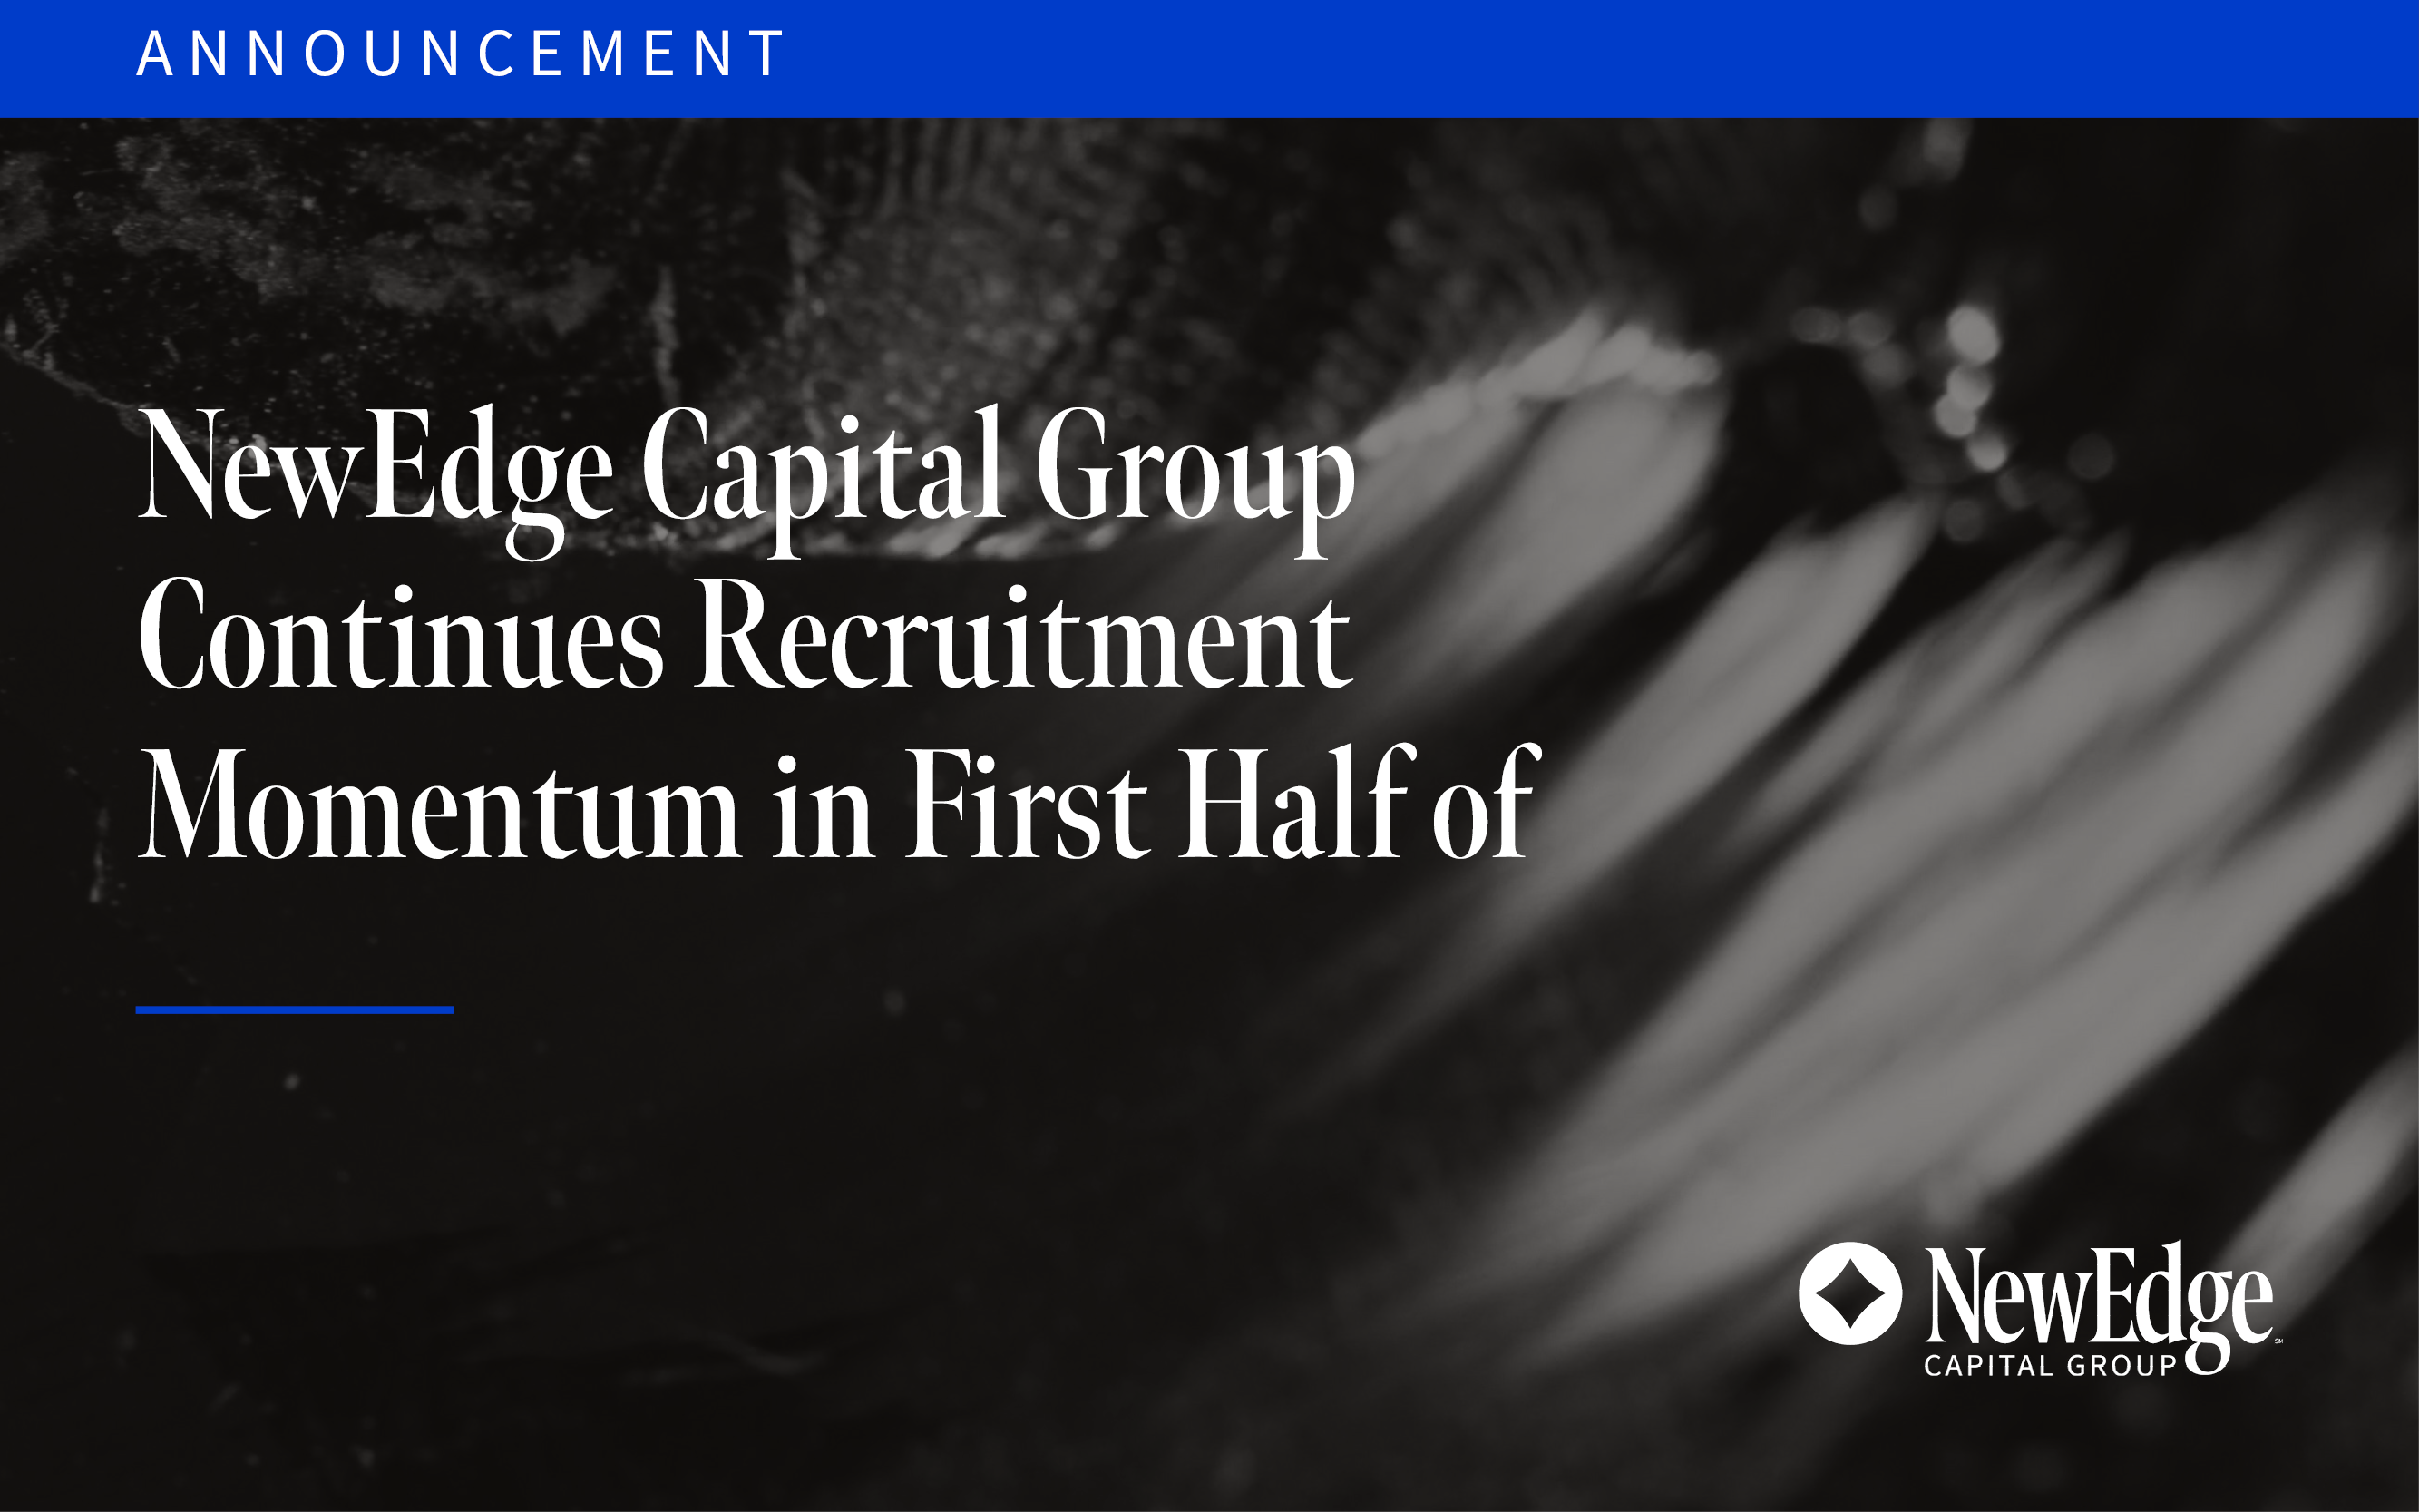 NewEdge Capital Group Continues Recruitment Momentum in First Half of 2023